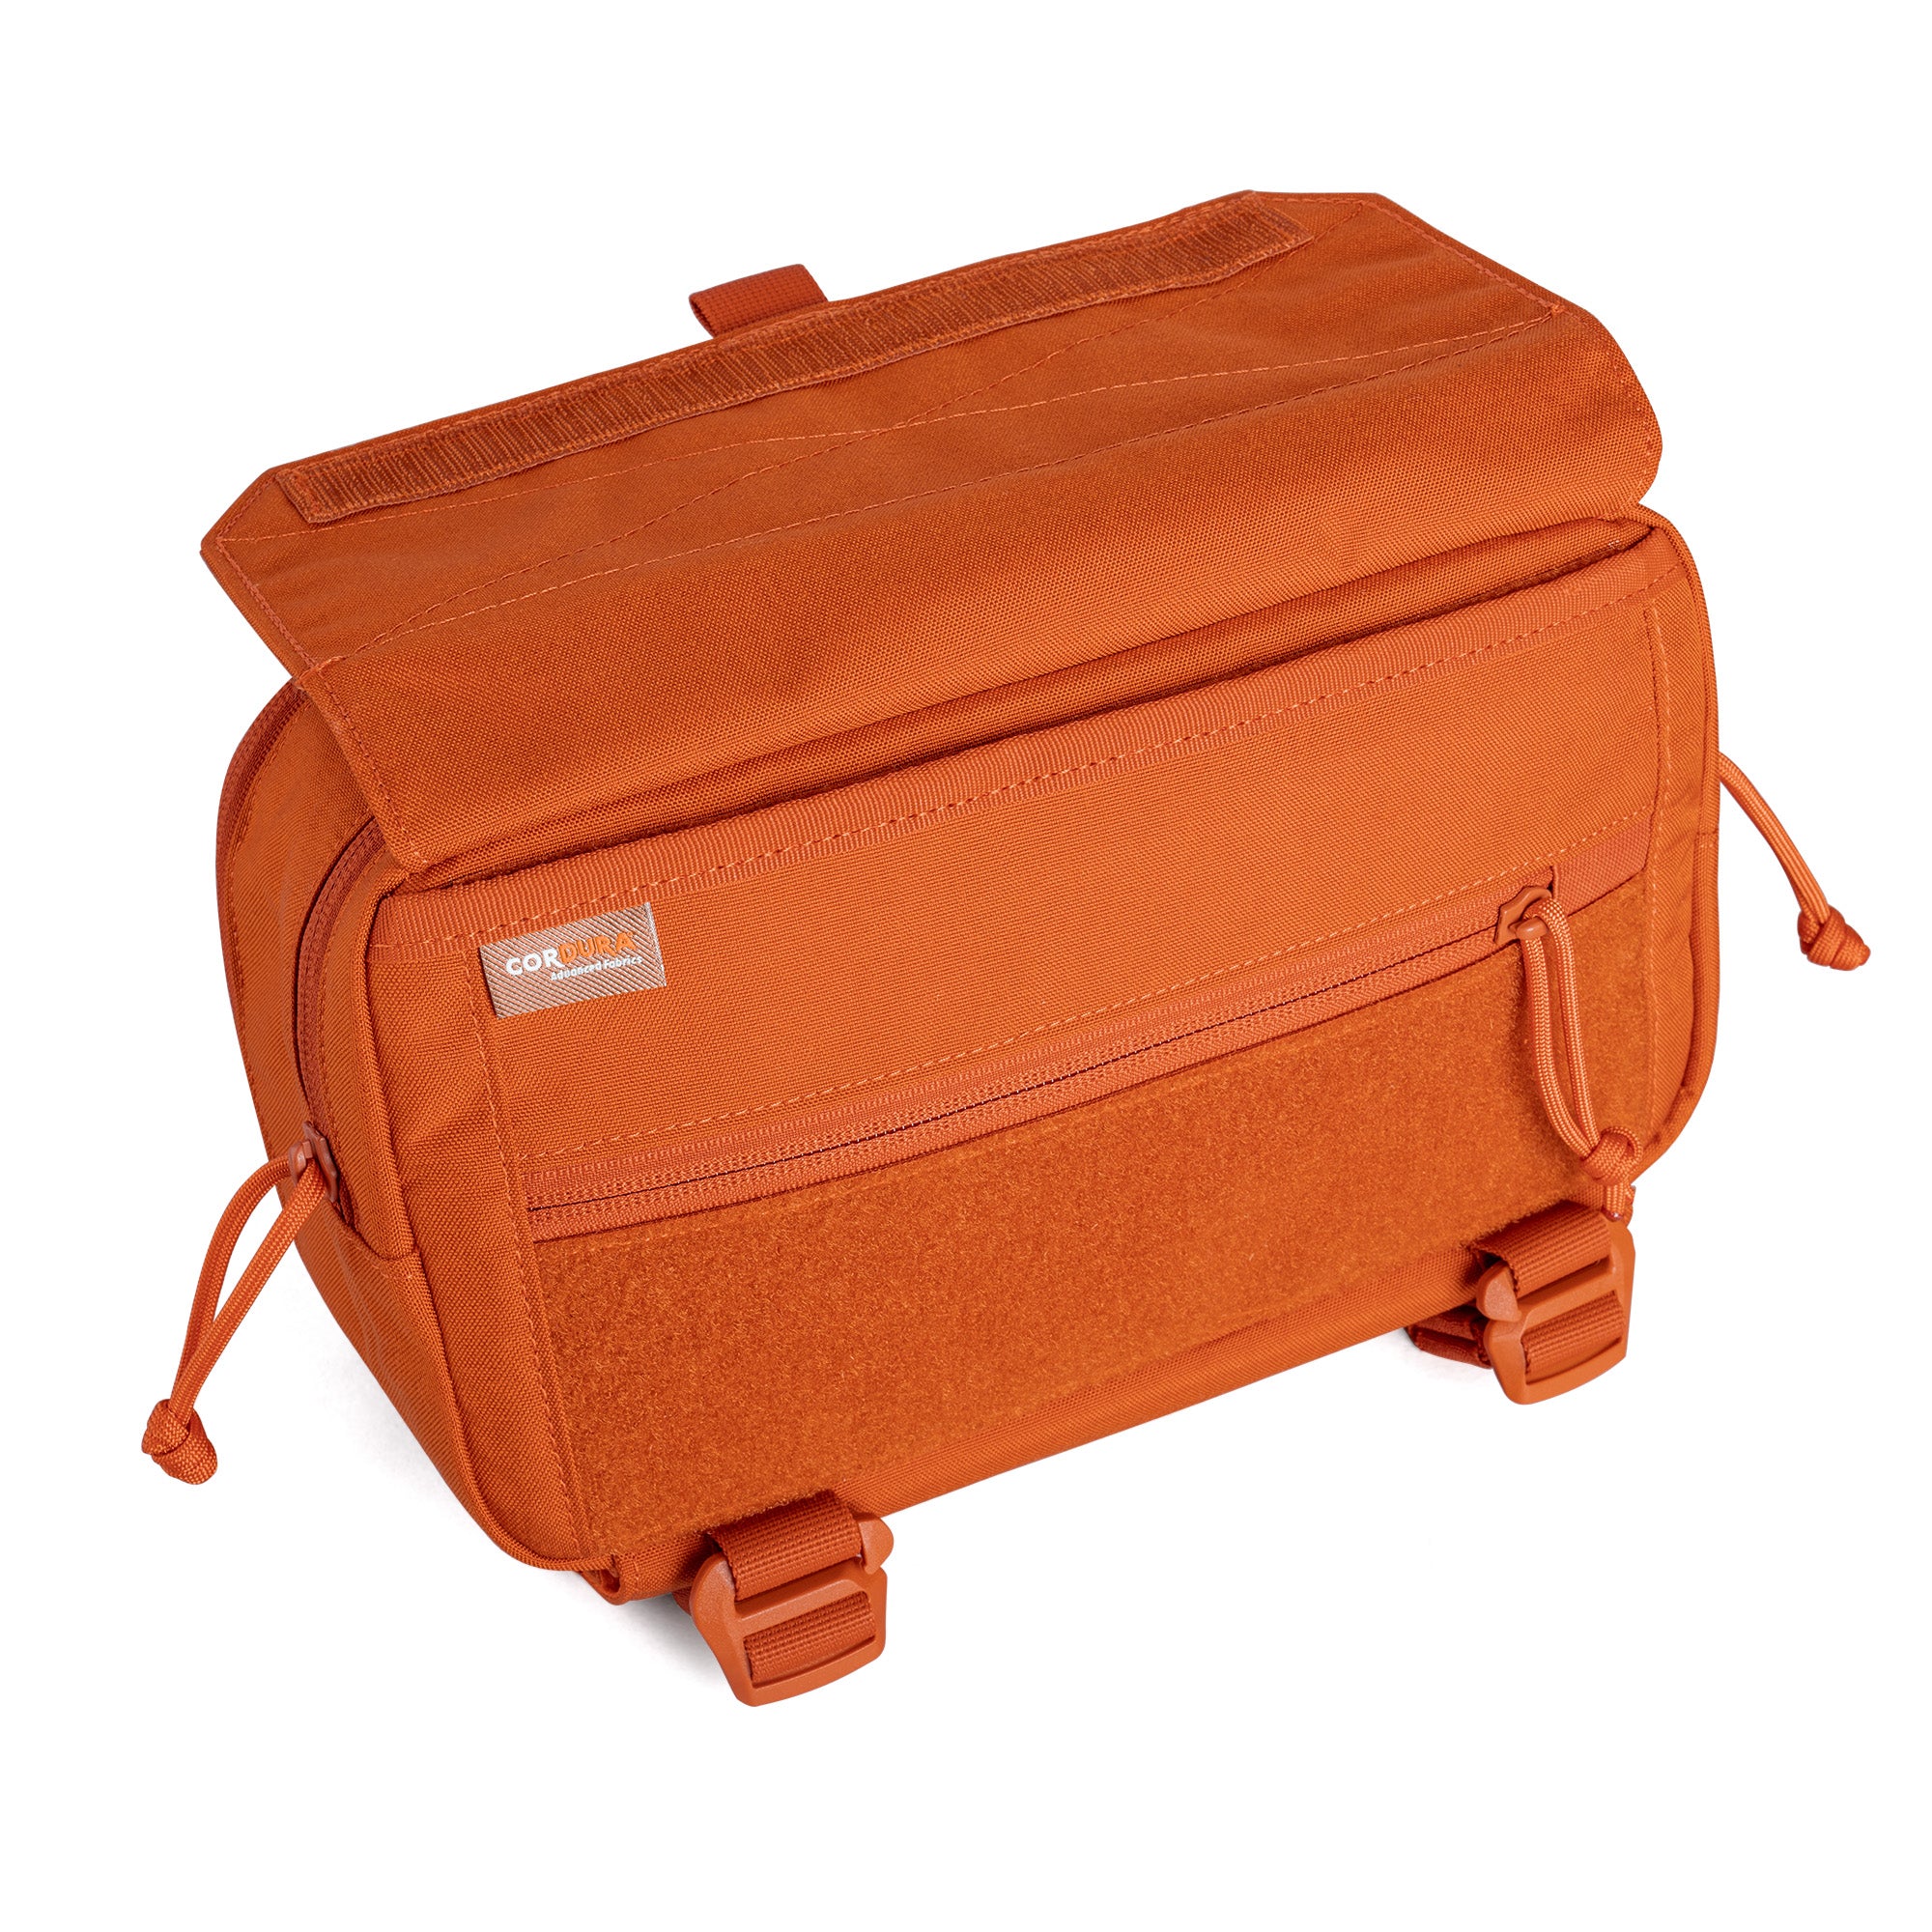 Carry Bag Return Favour - Orange – Between Boxes Gifts